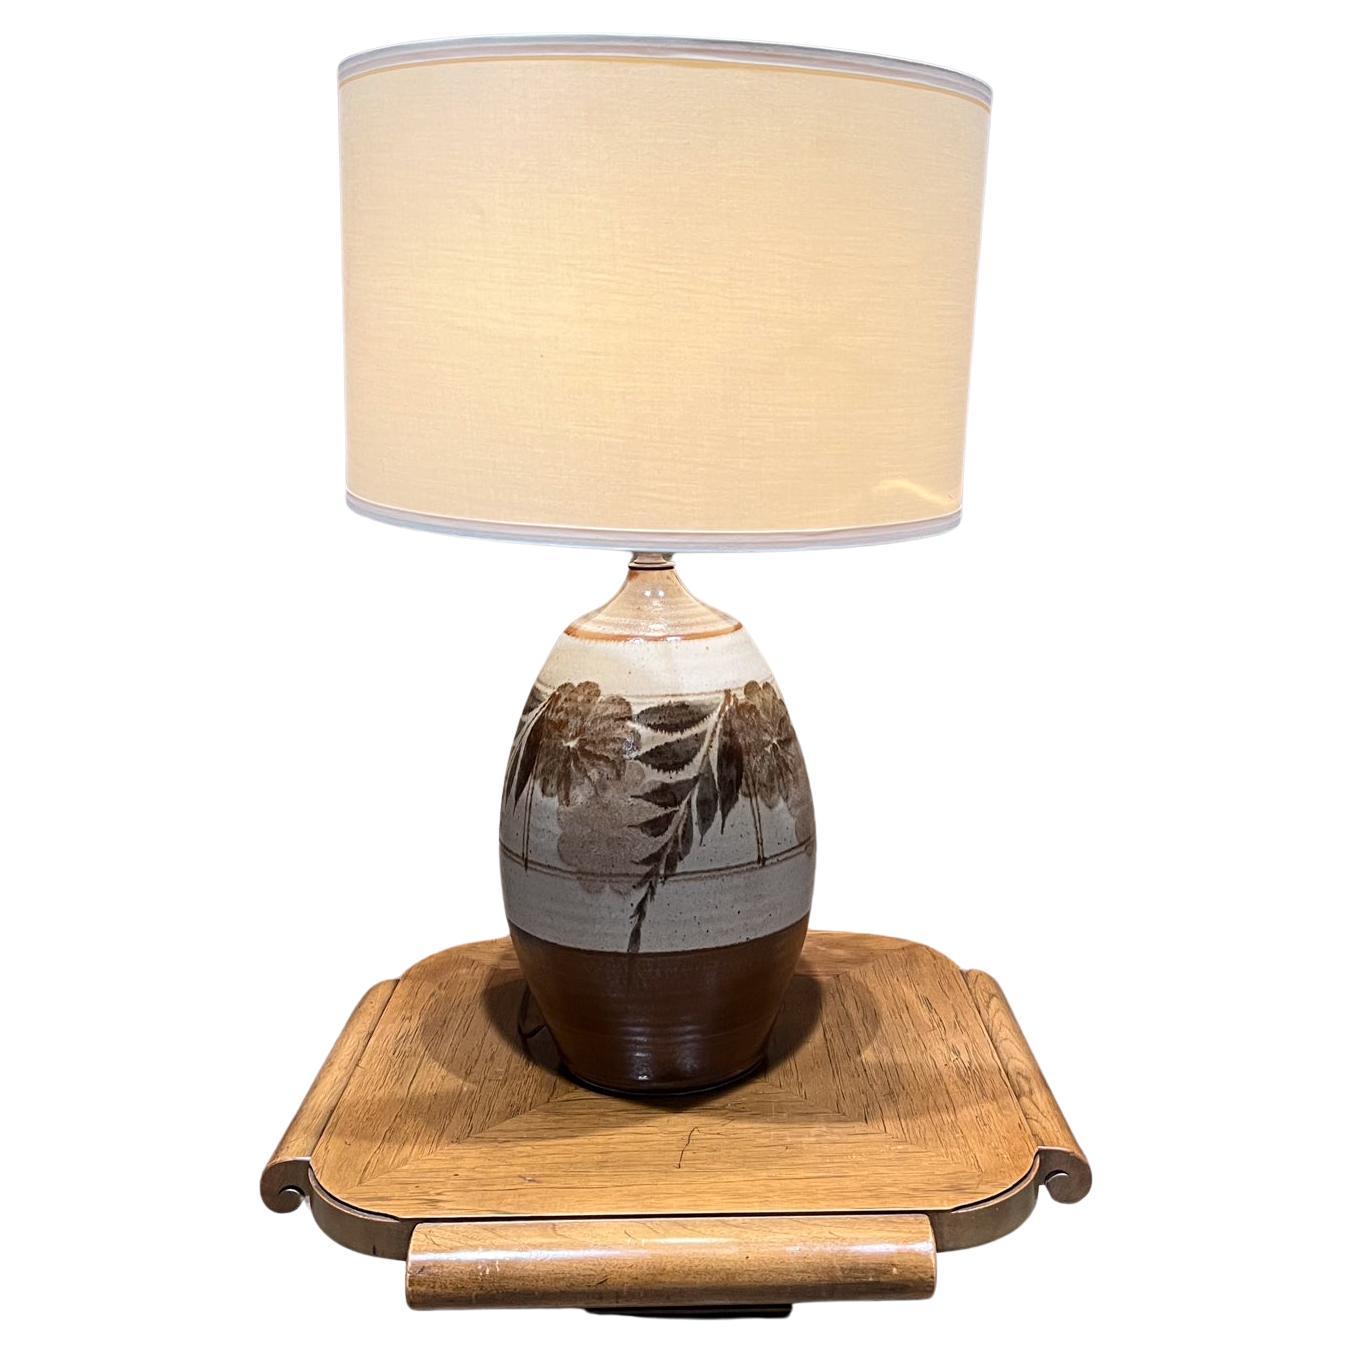 1960s Studio Art Pottery Tall Table Lamp Glazed Stoneware Floral design
in the Style of Gordon Martz, Wishon-Harrell
Unmarked
19.5 h x 9.5 diameter
Preowned unrestored original vintage.
No shade or bulb included
Tested and working.
Please refer to